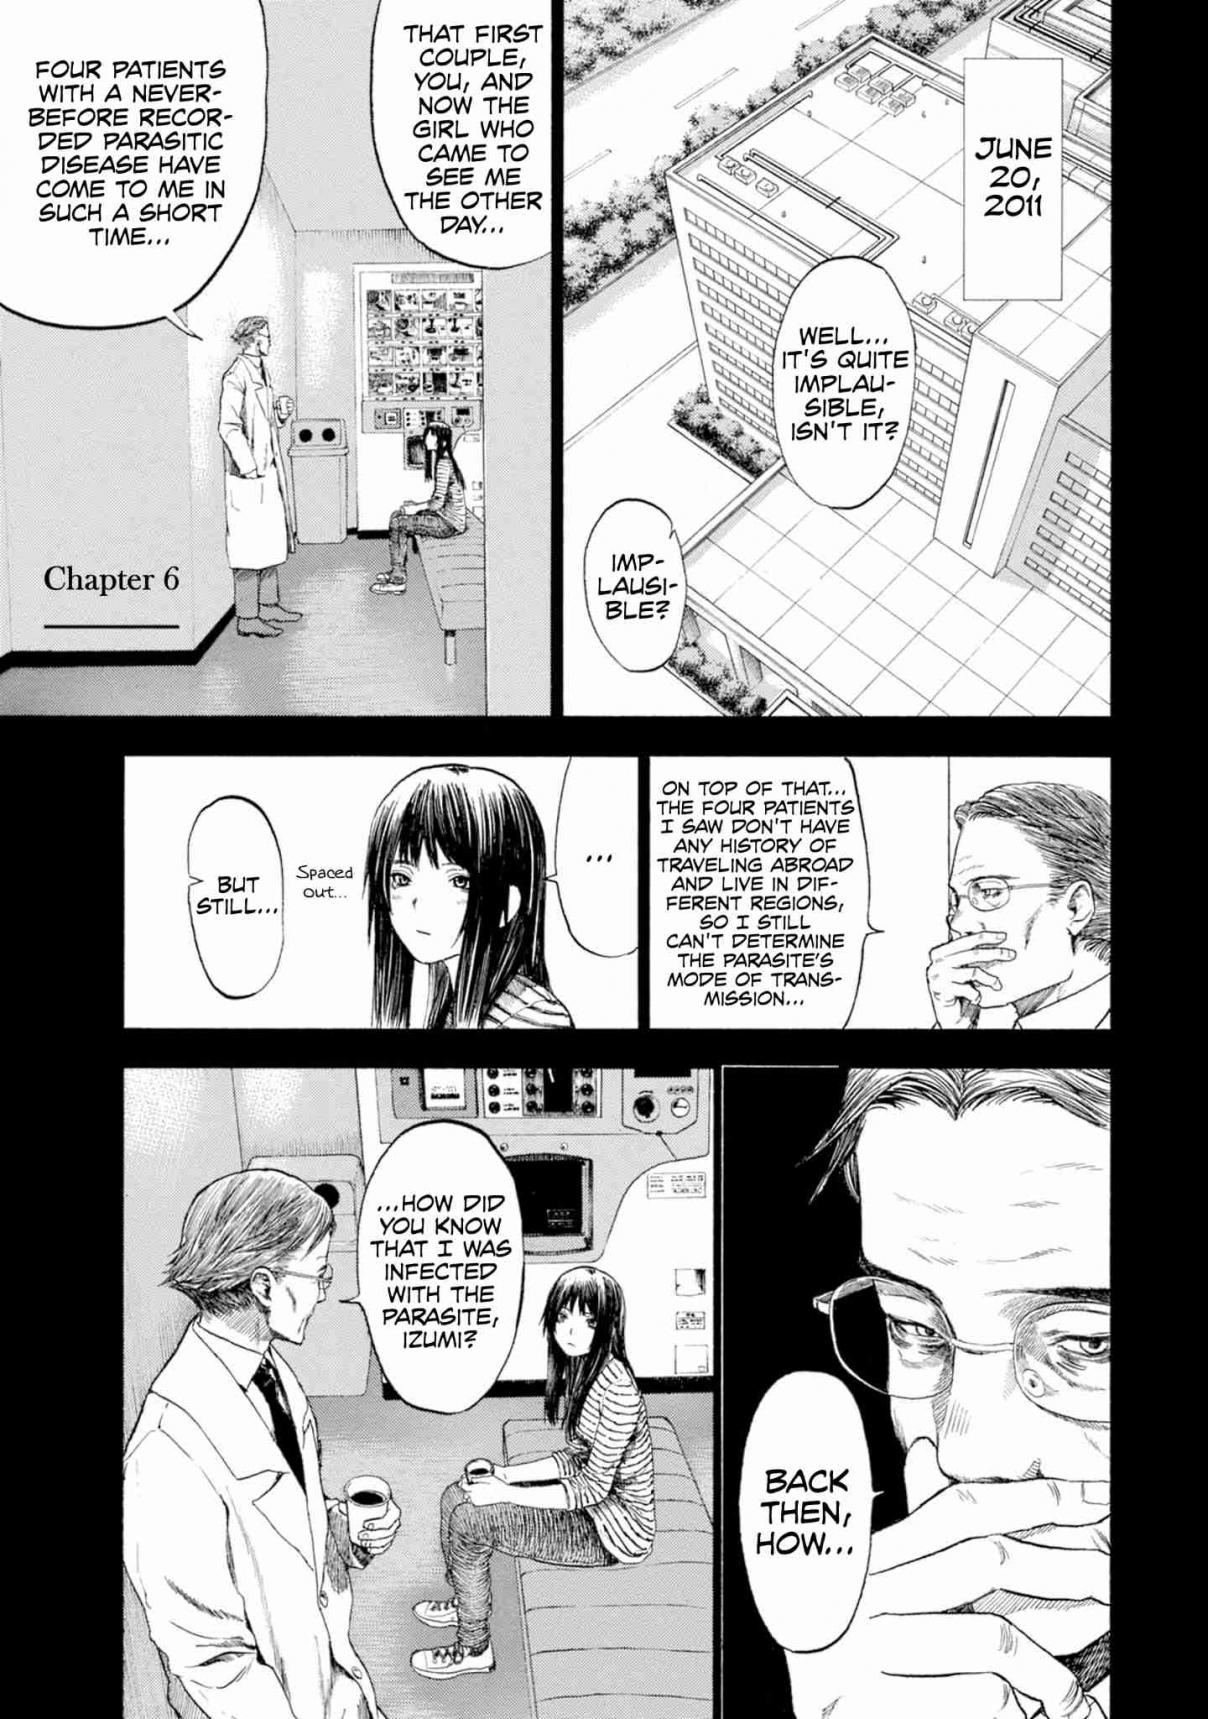 Parasite in Love Vol. 2 Ch. 6